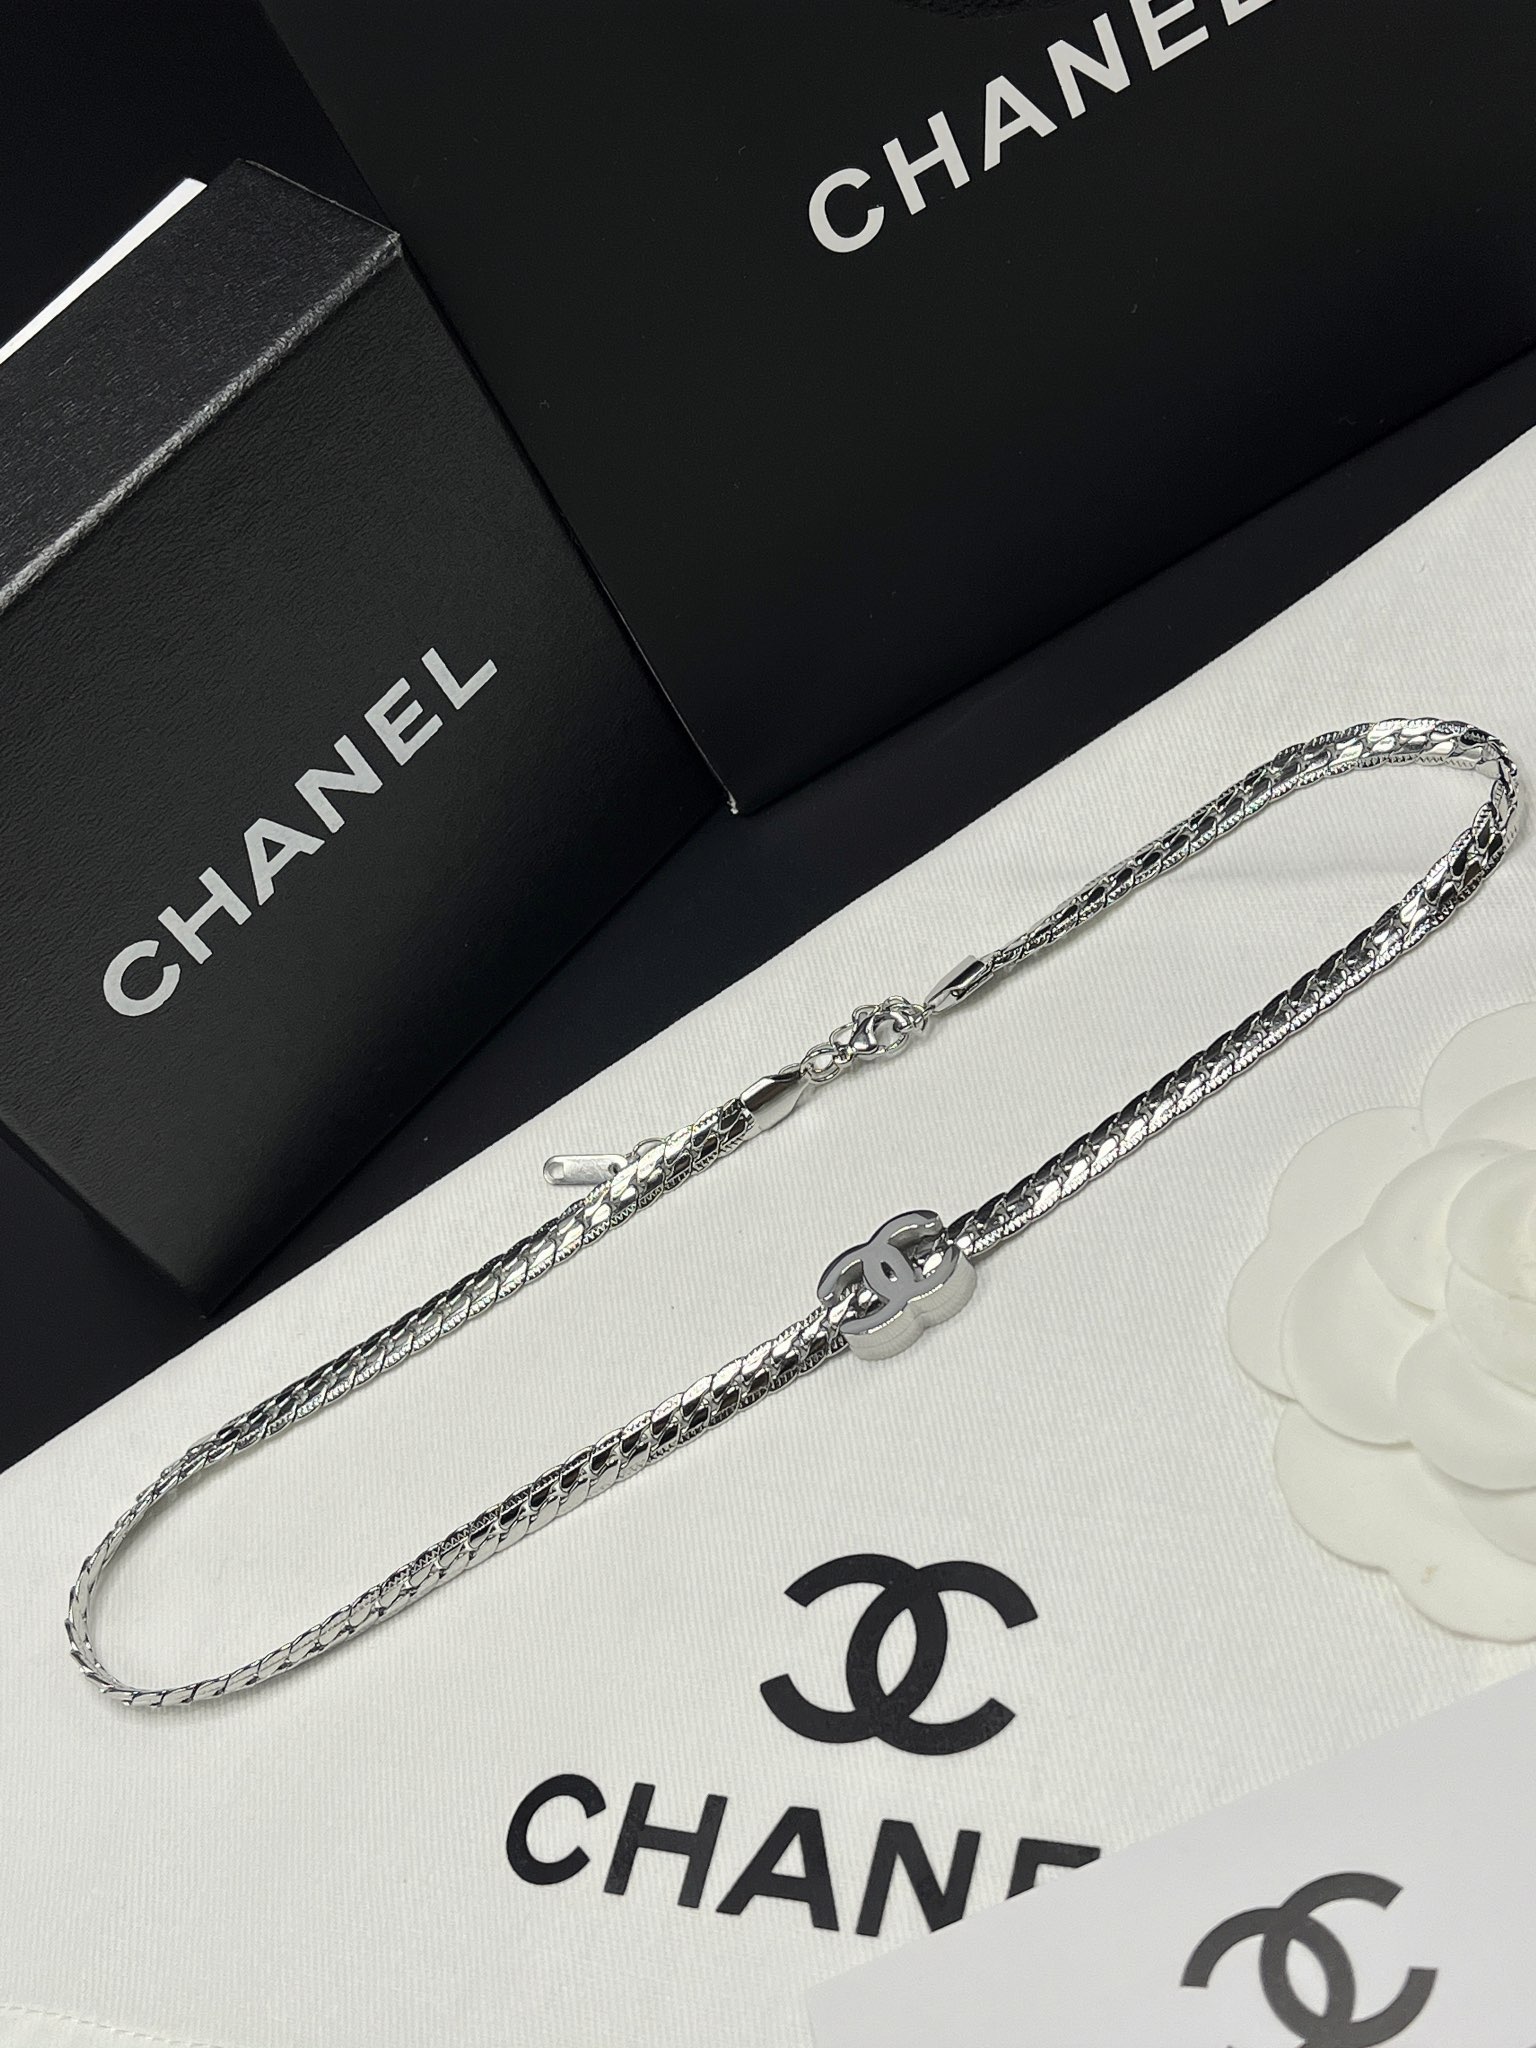 X557 Chanel choker necklace